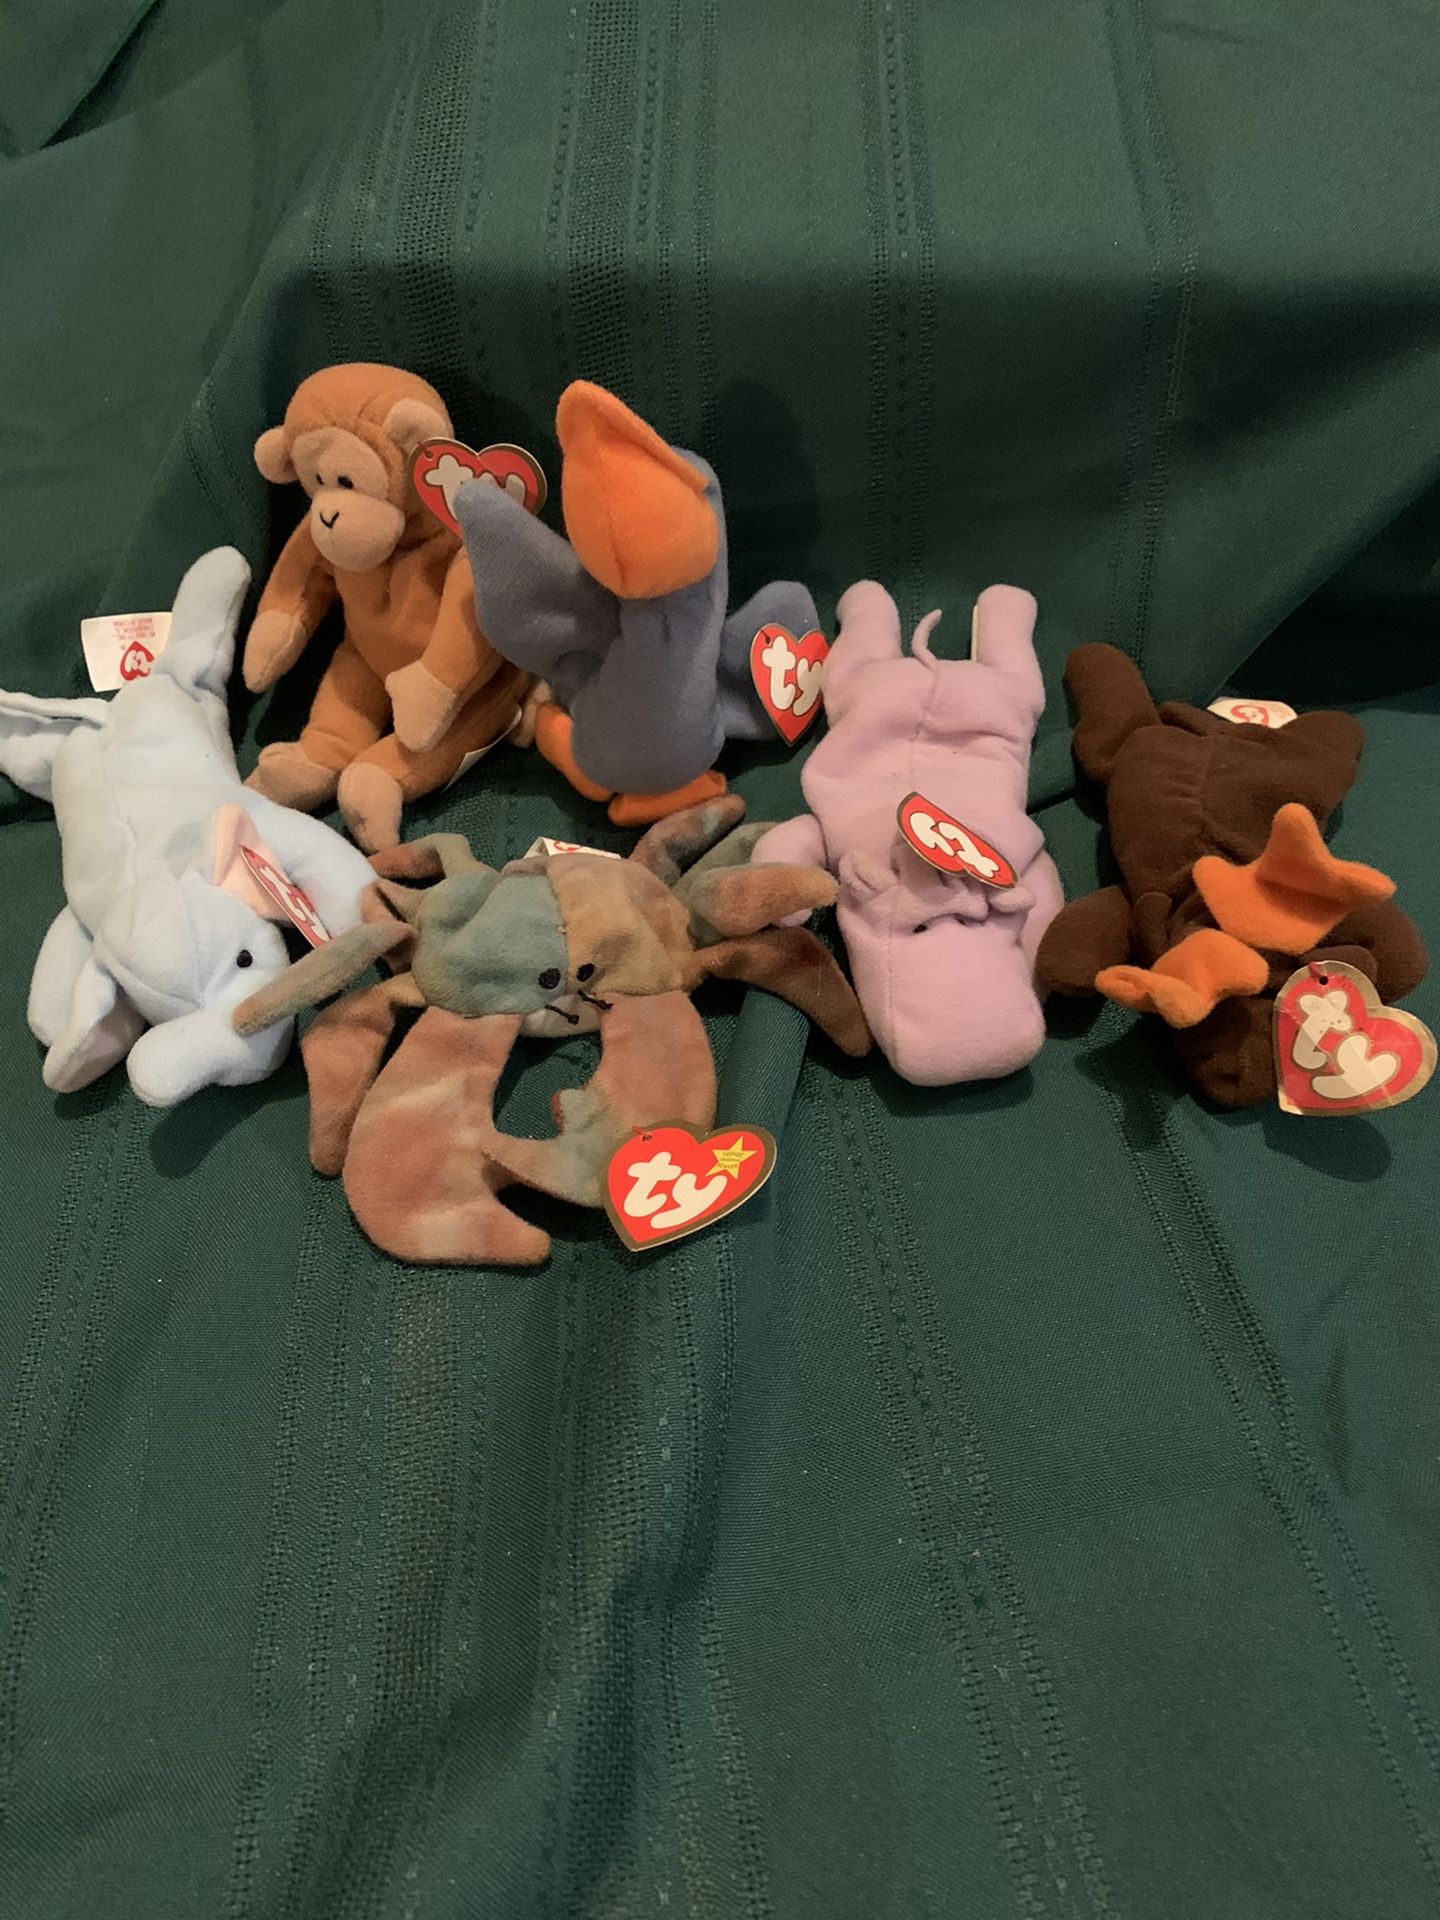 1993 Ty Beanie baby Mcdonald’s collection